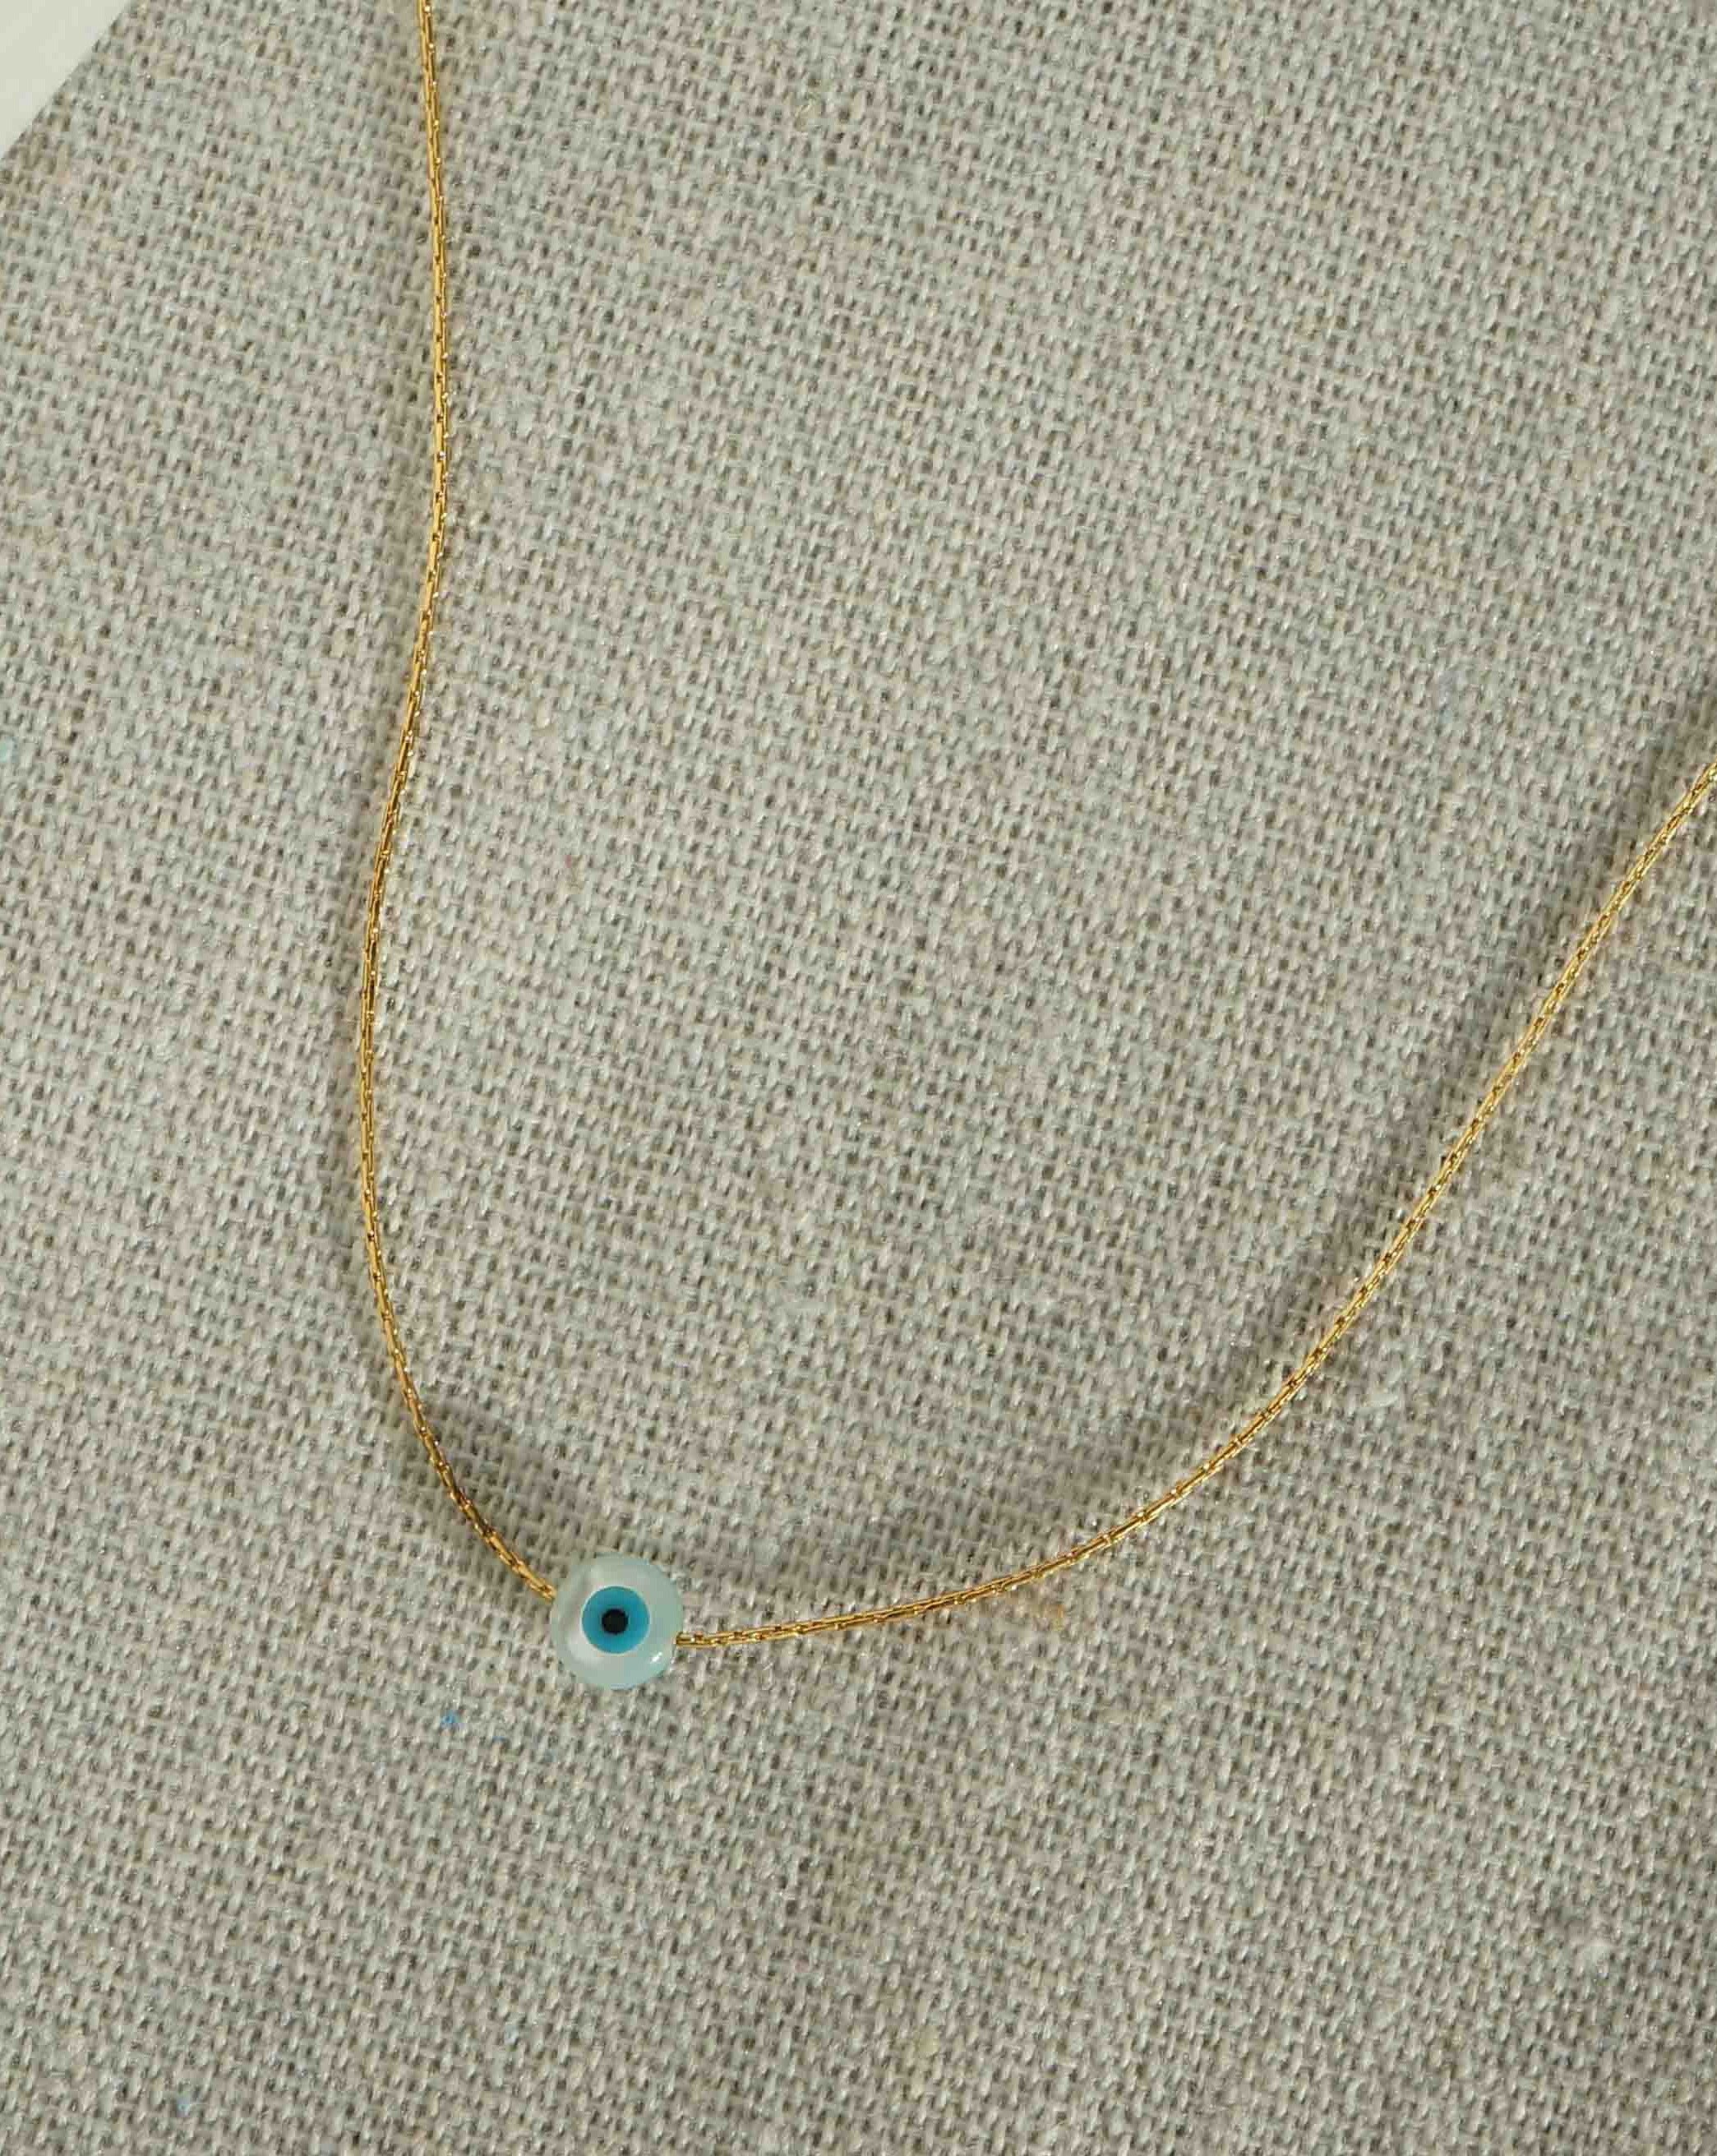 Idra Necklace by KOZAKH. A 16 to 18 inch adjustable length, 1mm thick cordette chain necklace in 14K Gold Filled, featuring a 5mm hand carved Mother of Pearl Evil Eye charm.